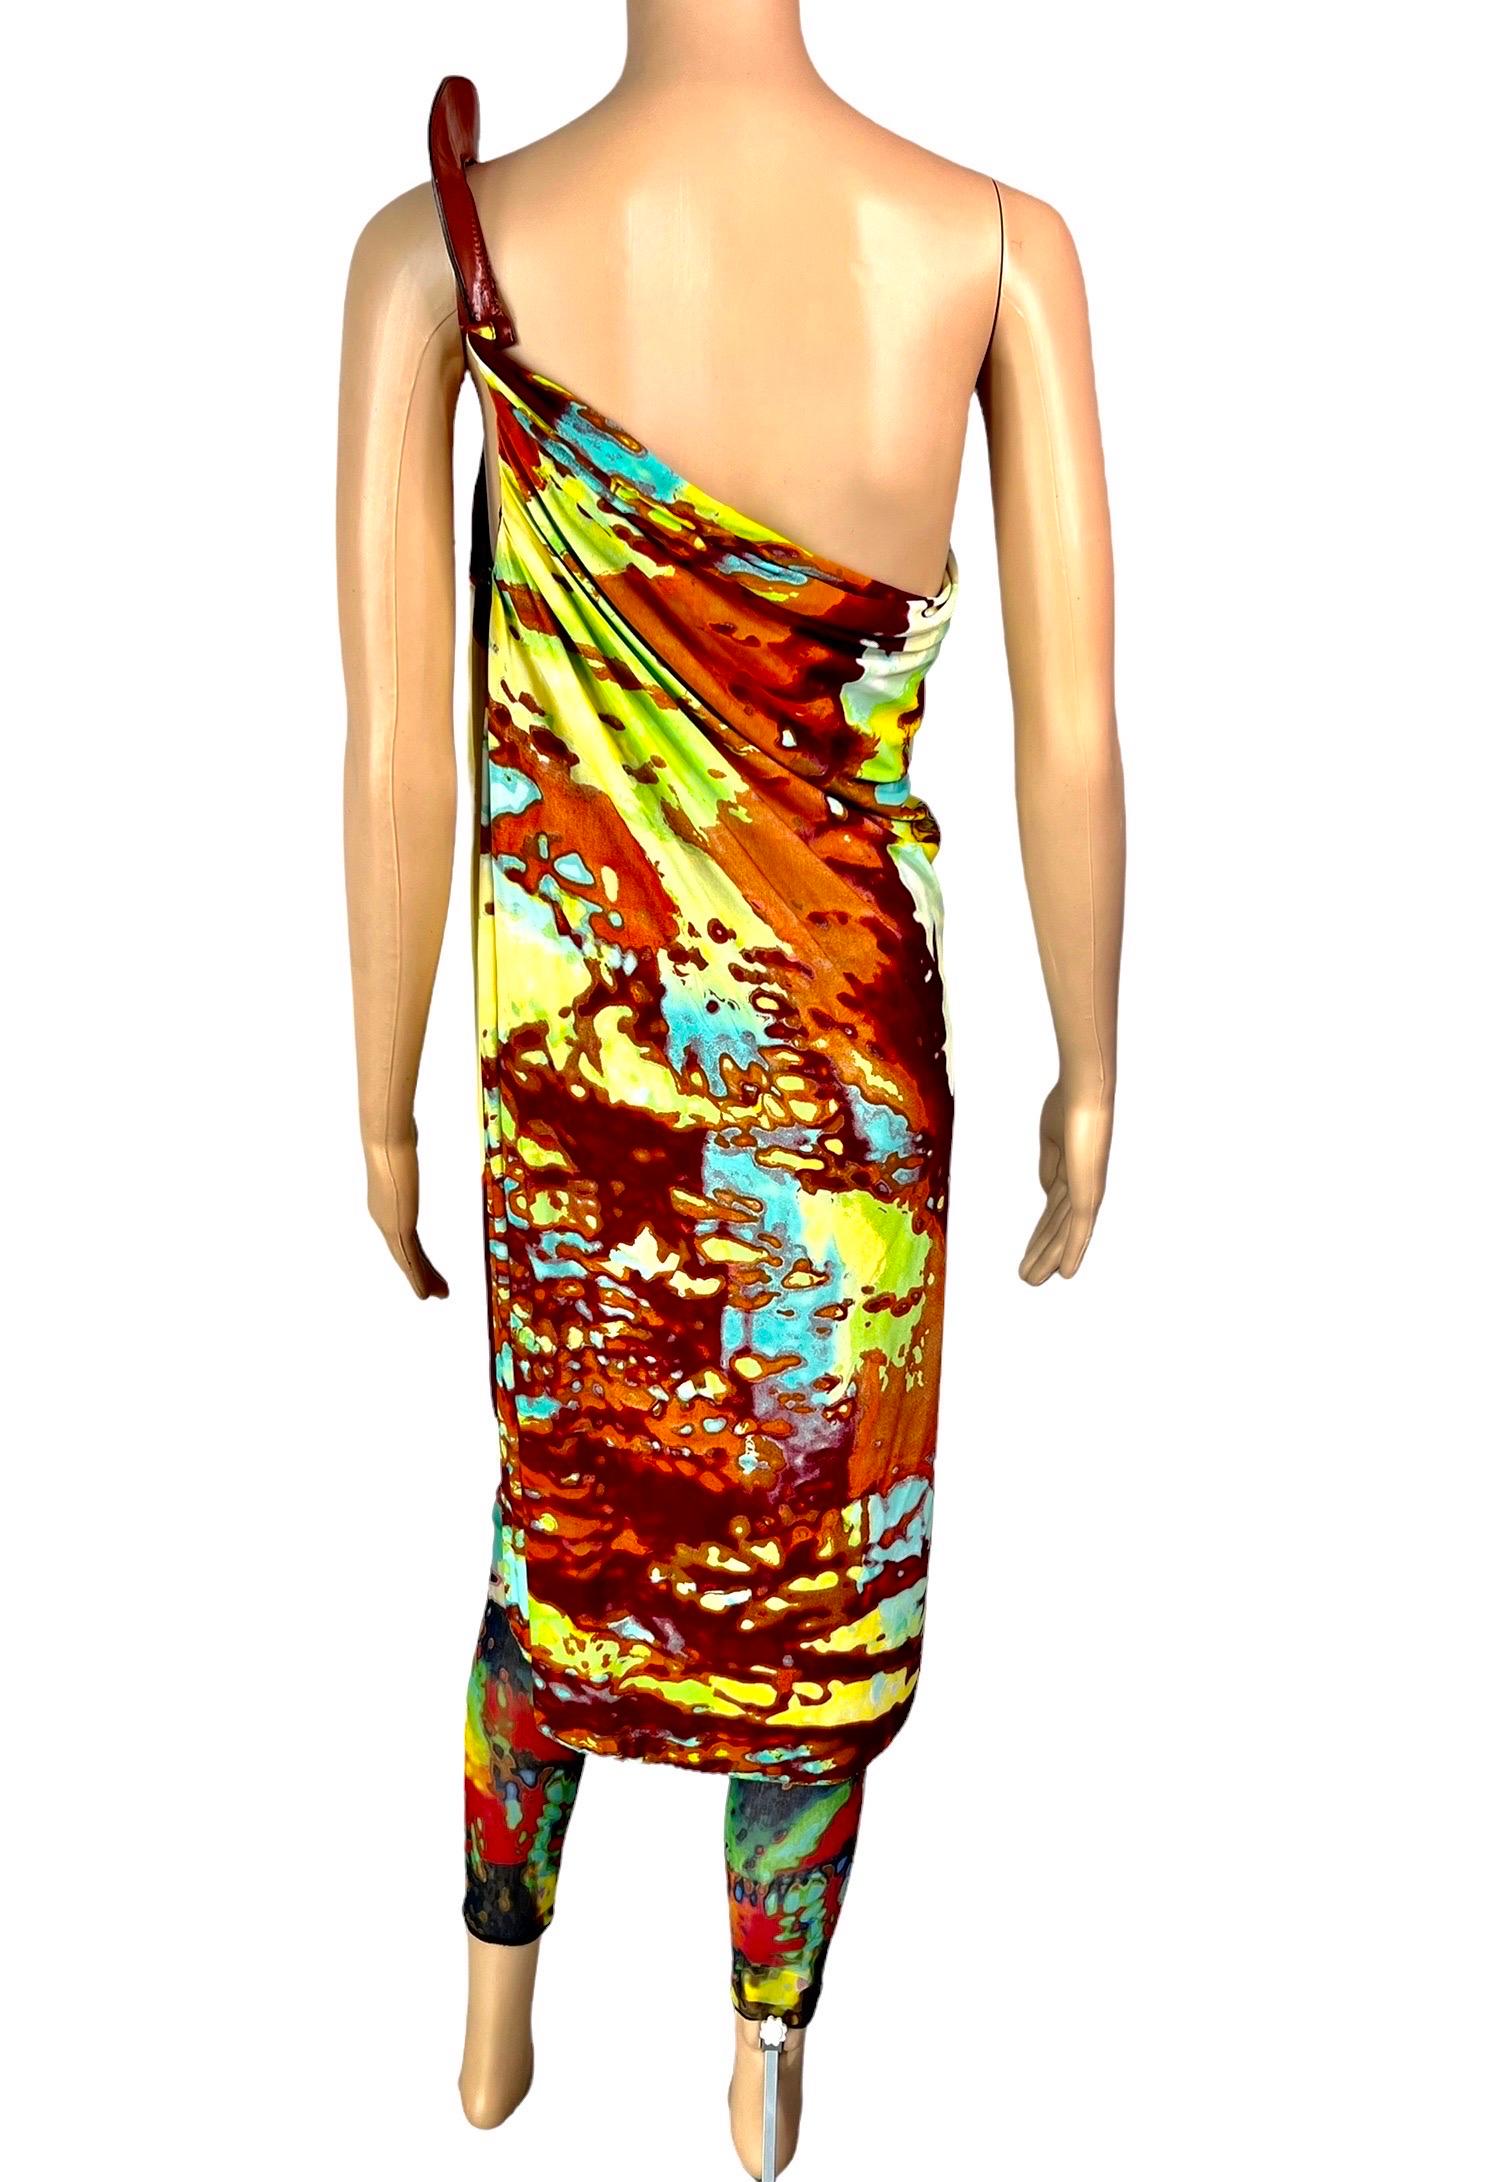 Jean Paul Gaultier S/S 2000 Psychedelic Dress & Leggings Ensemble 2 Piece Set In Good Condition For Sale In Naples, FL